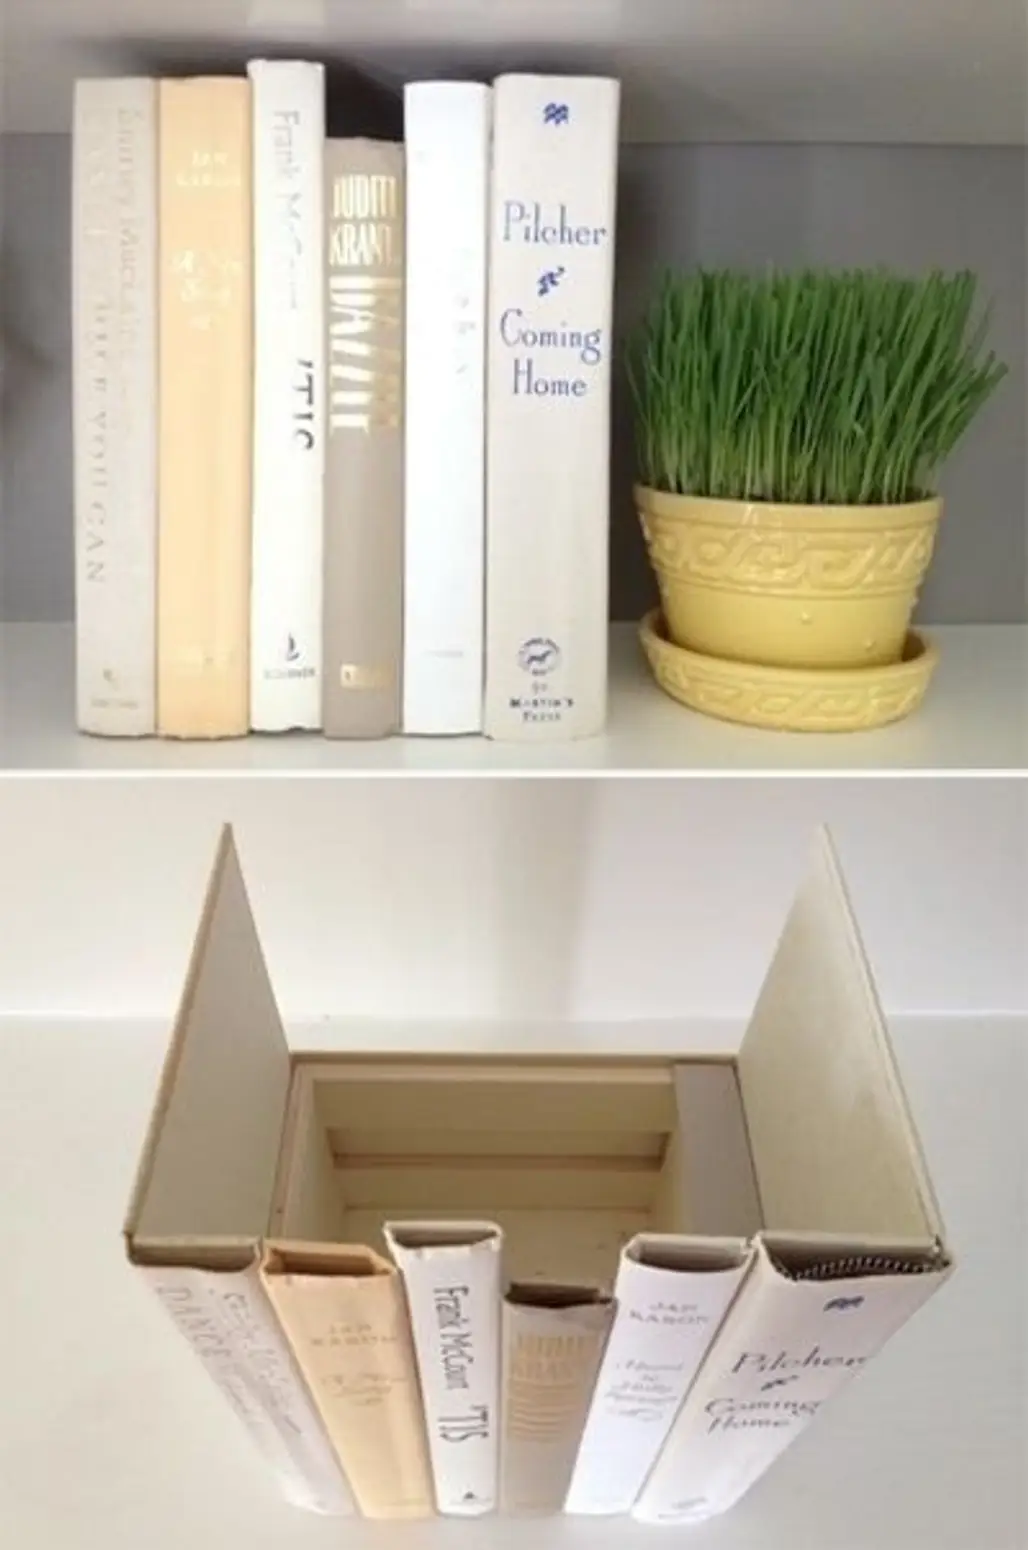 Hide Unsightly Items behind Fake Books